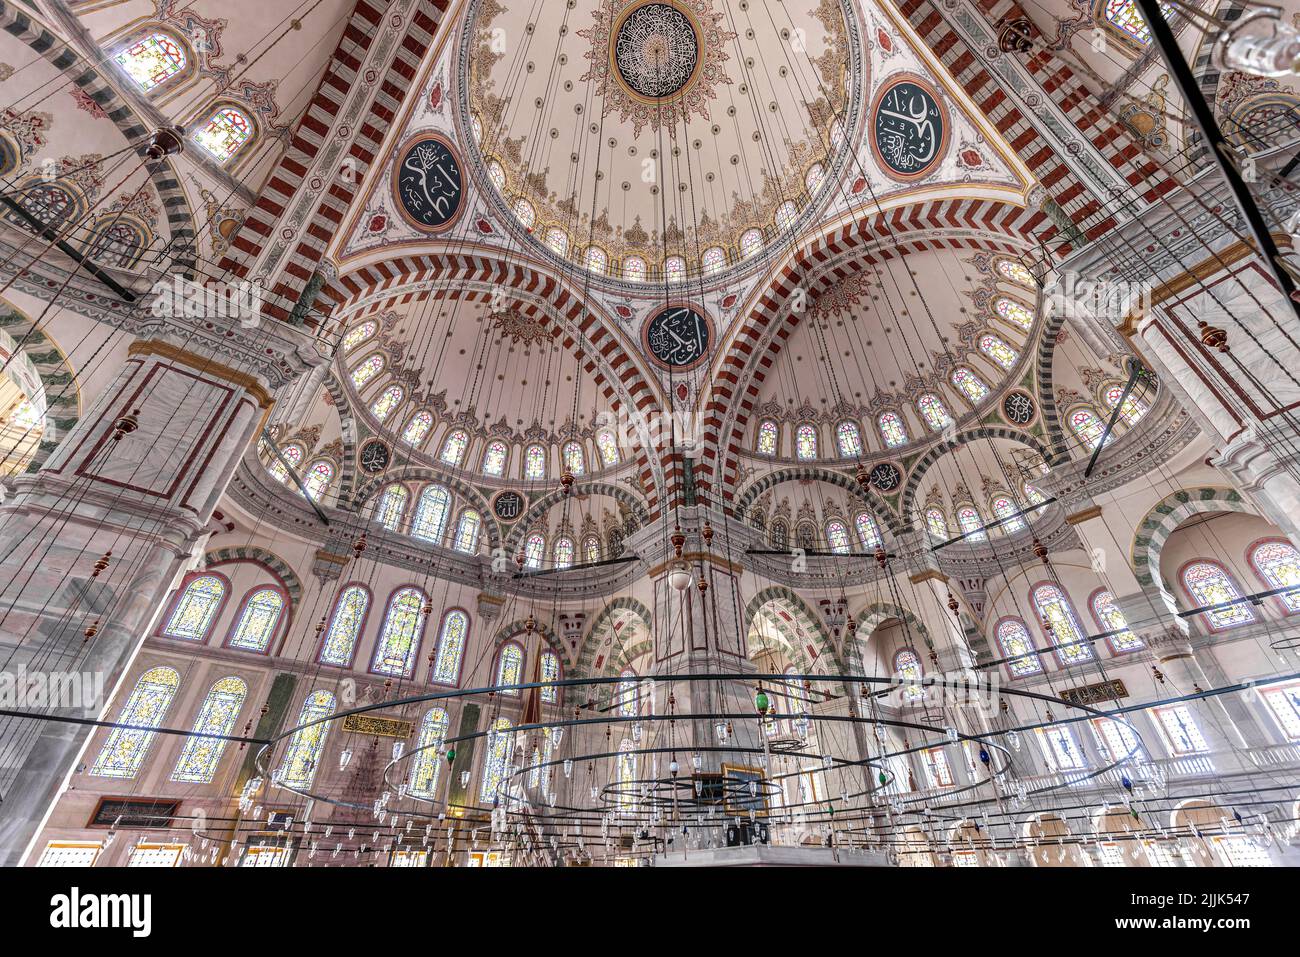 Fatih mosque in istanbul. internal view. Turkey. Stock Photo